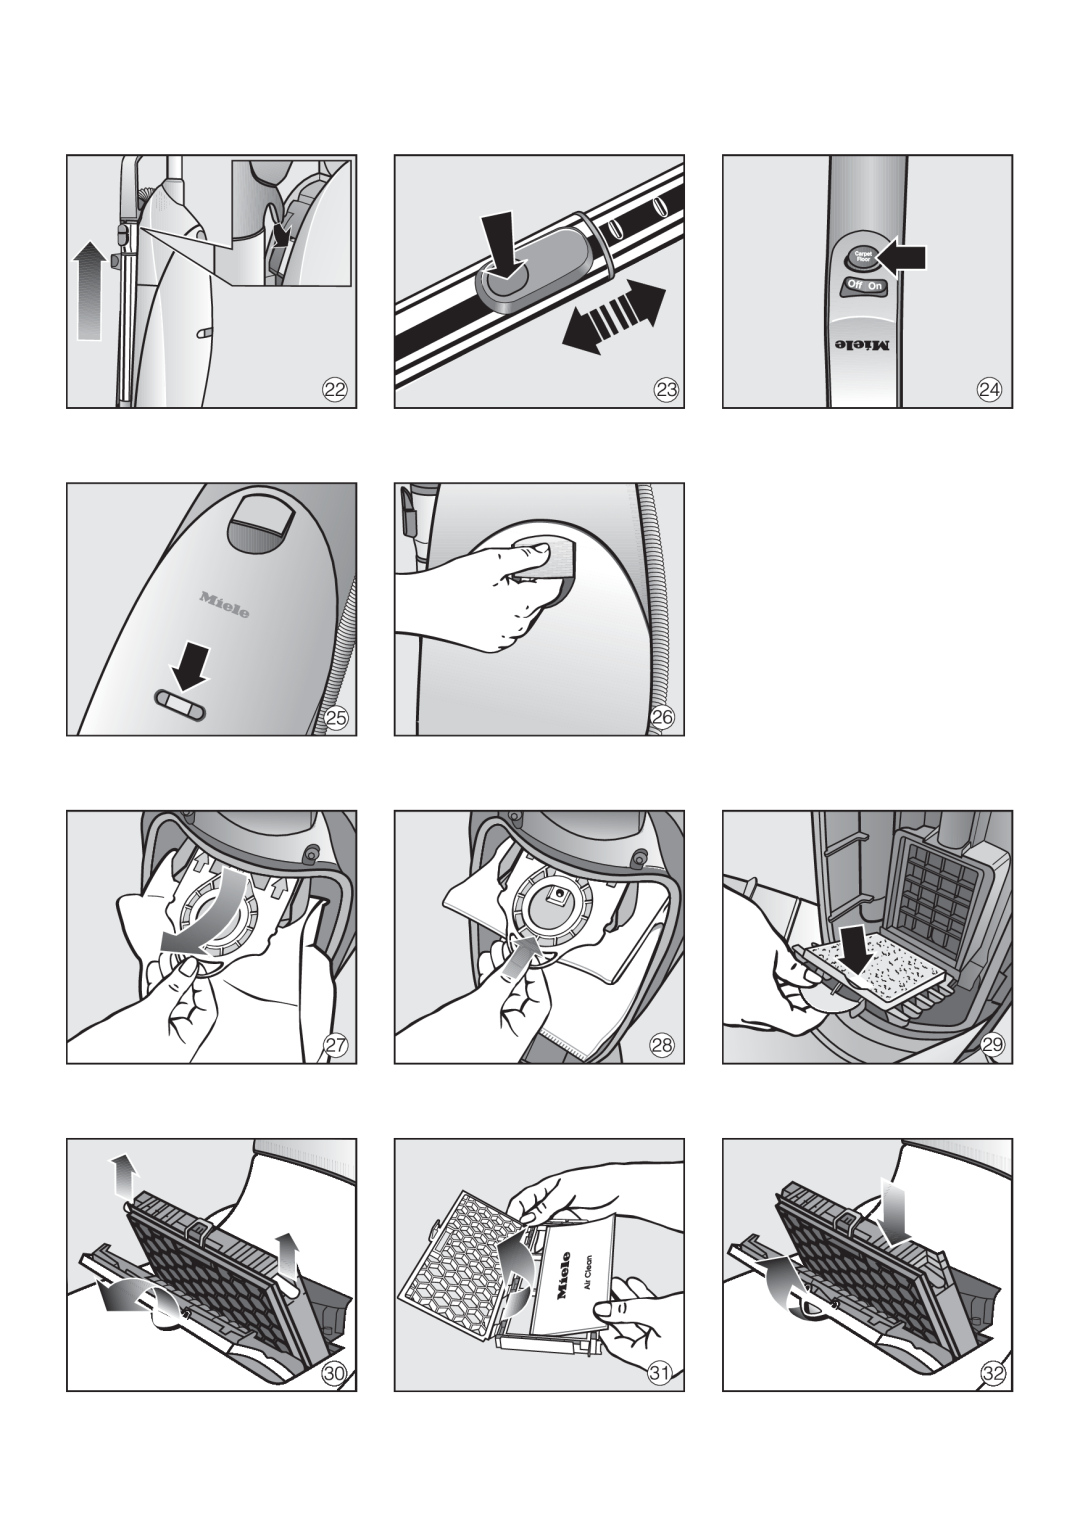 Miele HS08, M-NR09753 090 operating instructions 